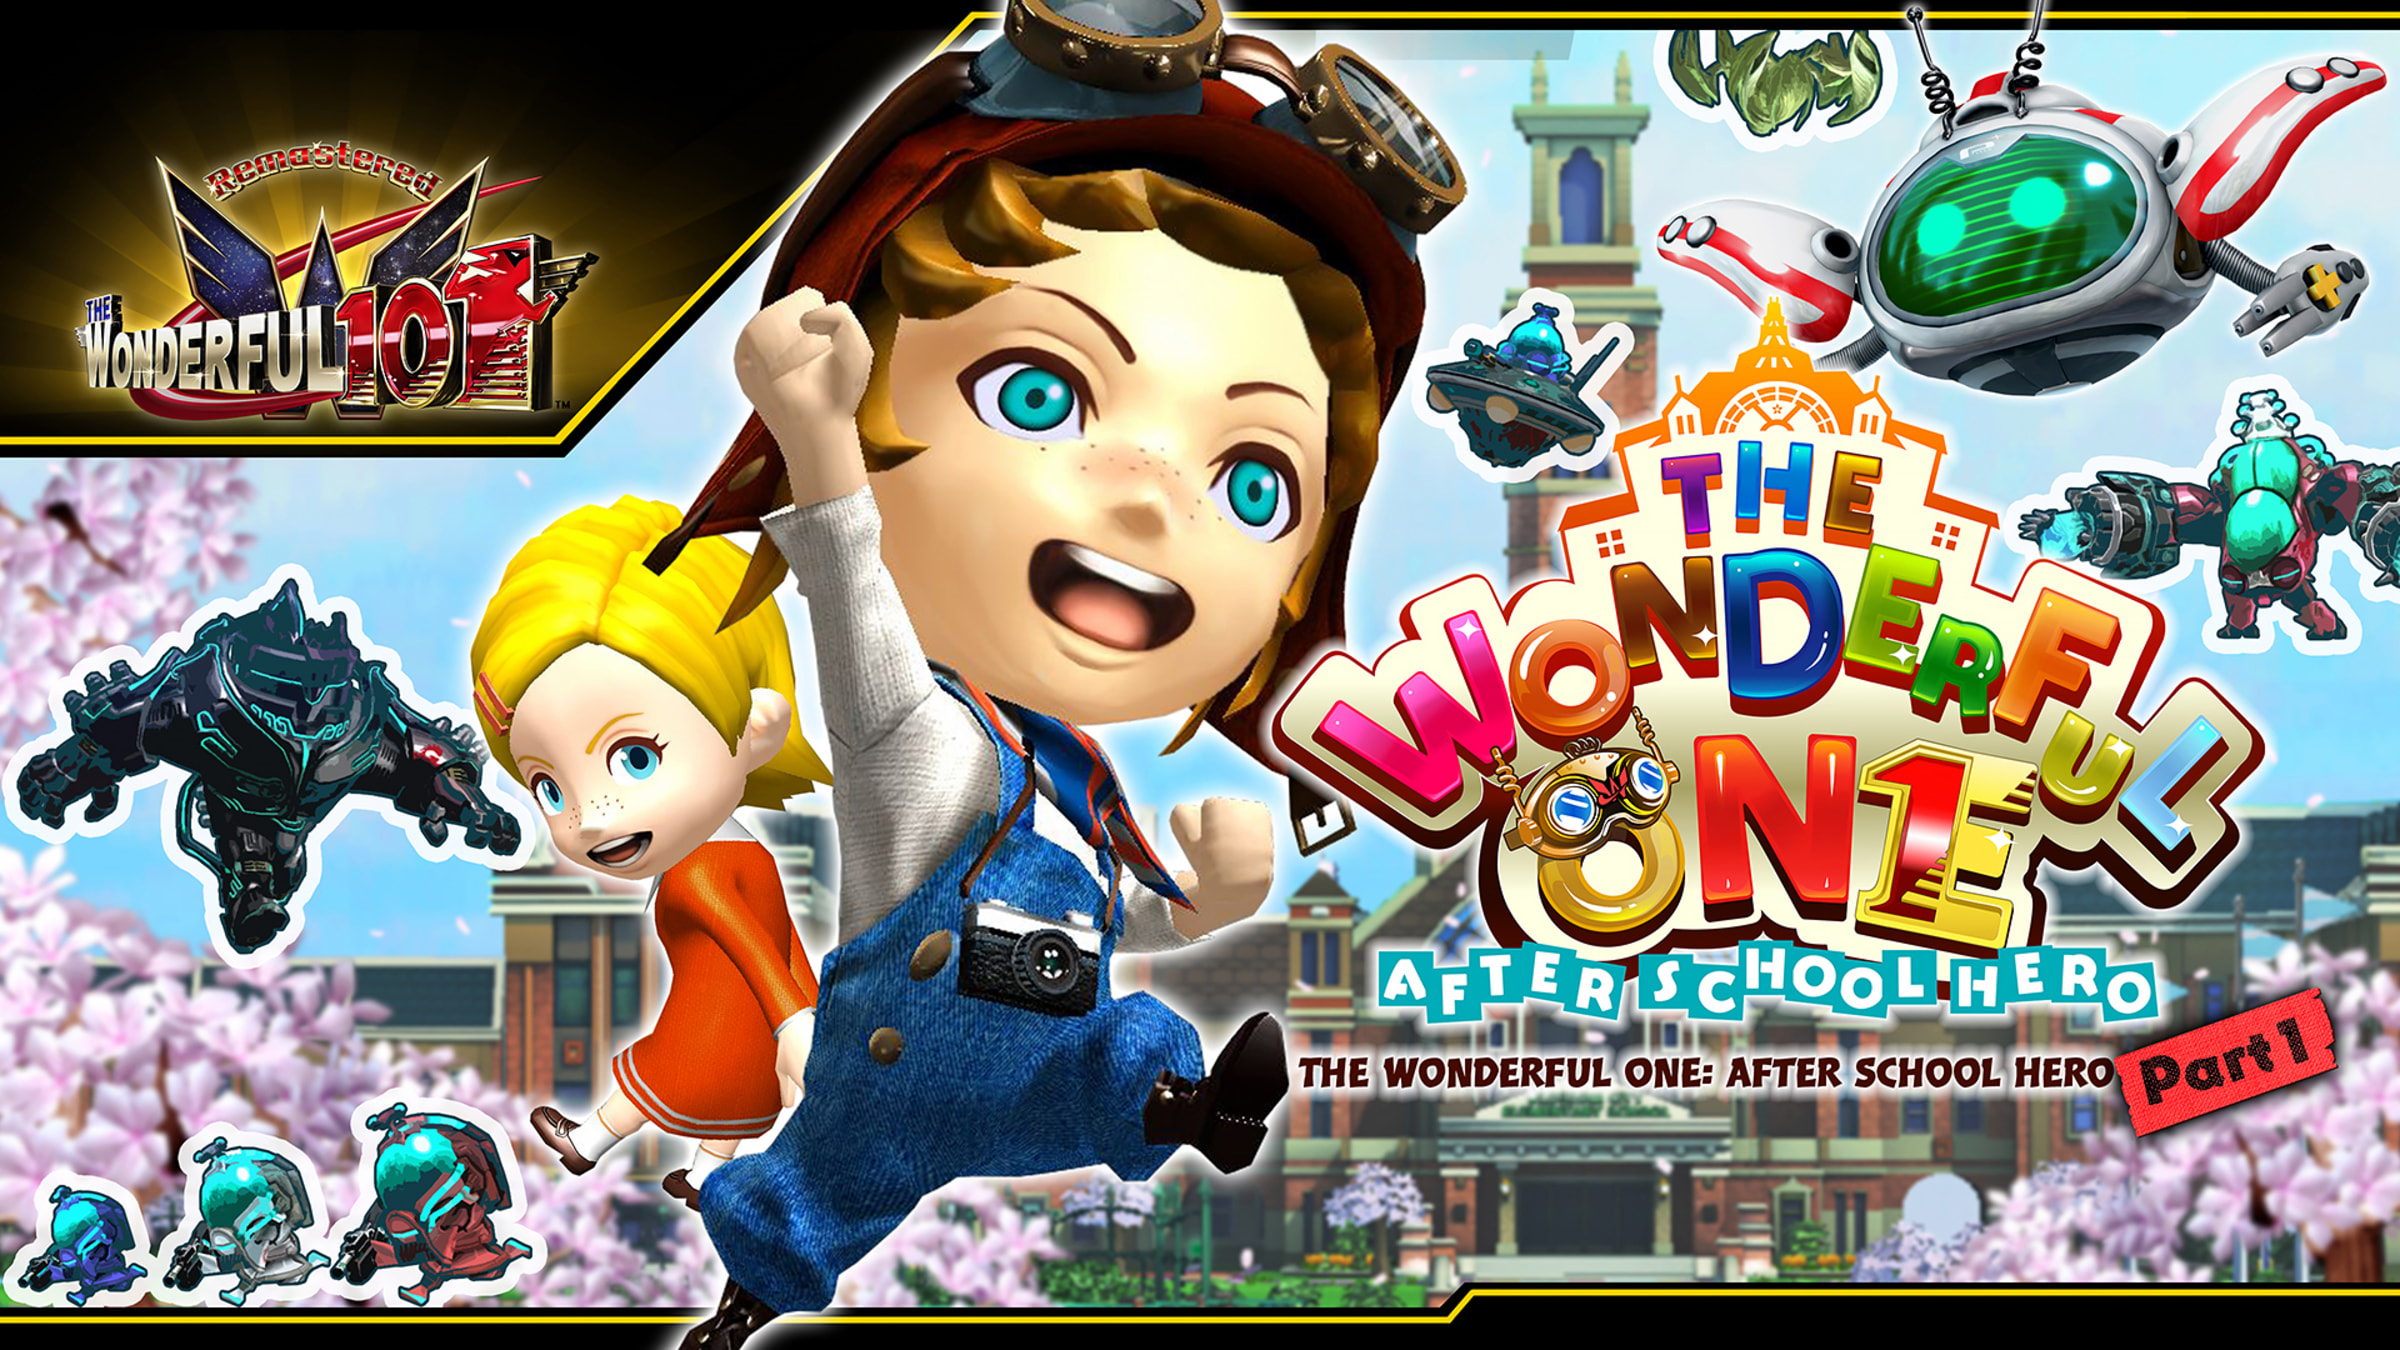 the-wonderful-101-remastered-the-wonderful-one-after-school-hero-part-1-for-nintendo